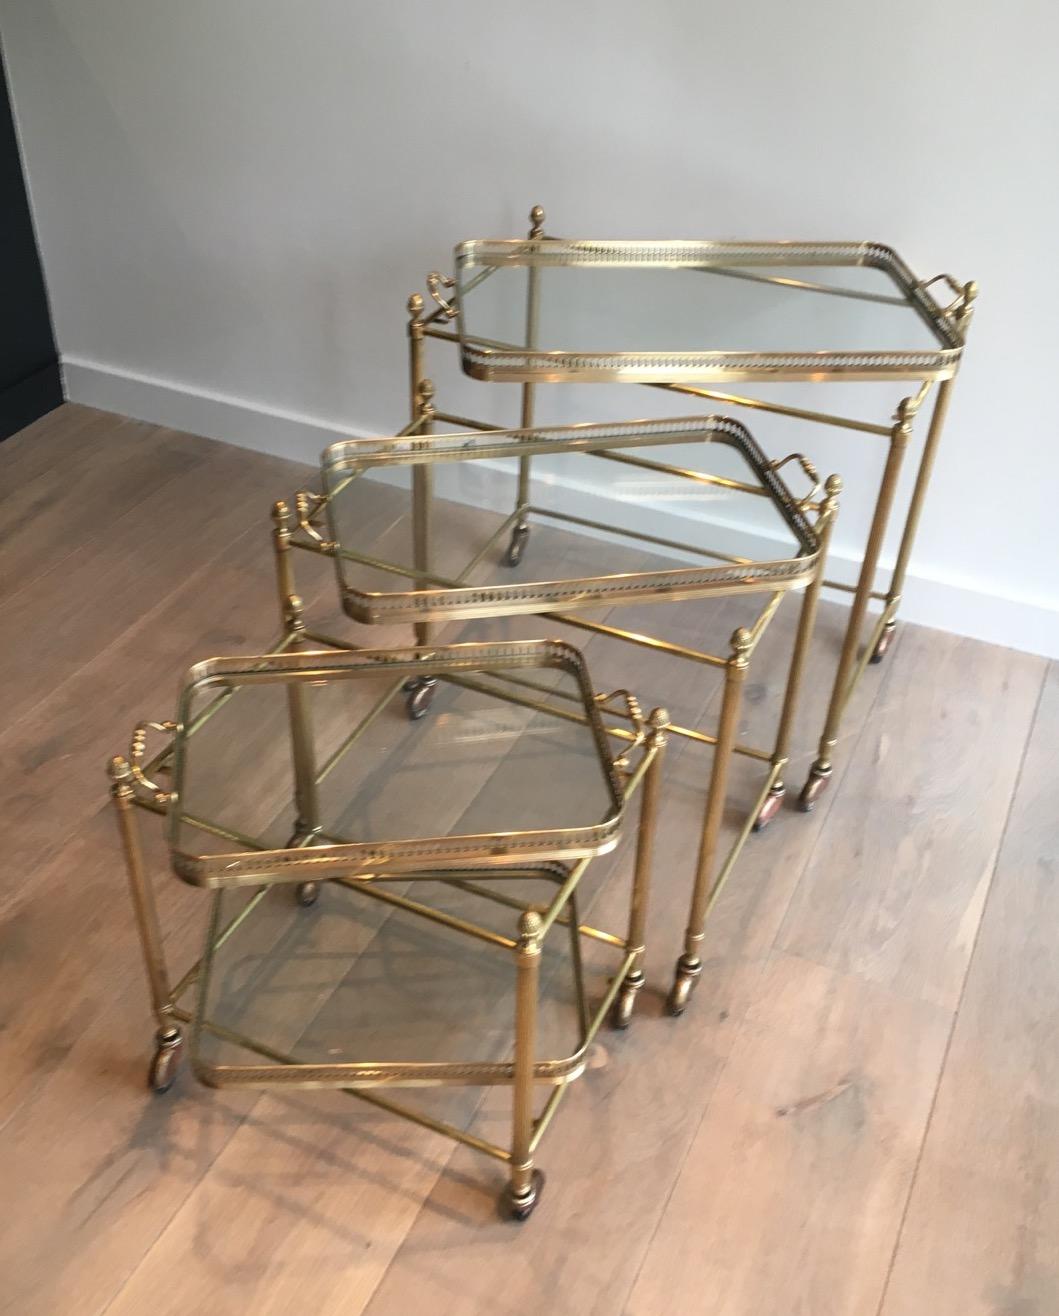 This set of 3 neoclassical style nesting tables on casters are made of brass. These trolleys have fluted legs, decorative finials and very fine removable trays. The quality of these pieces is really fine. This is a work by famous French Maison